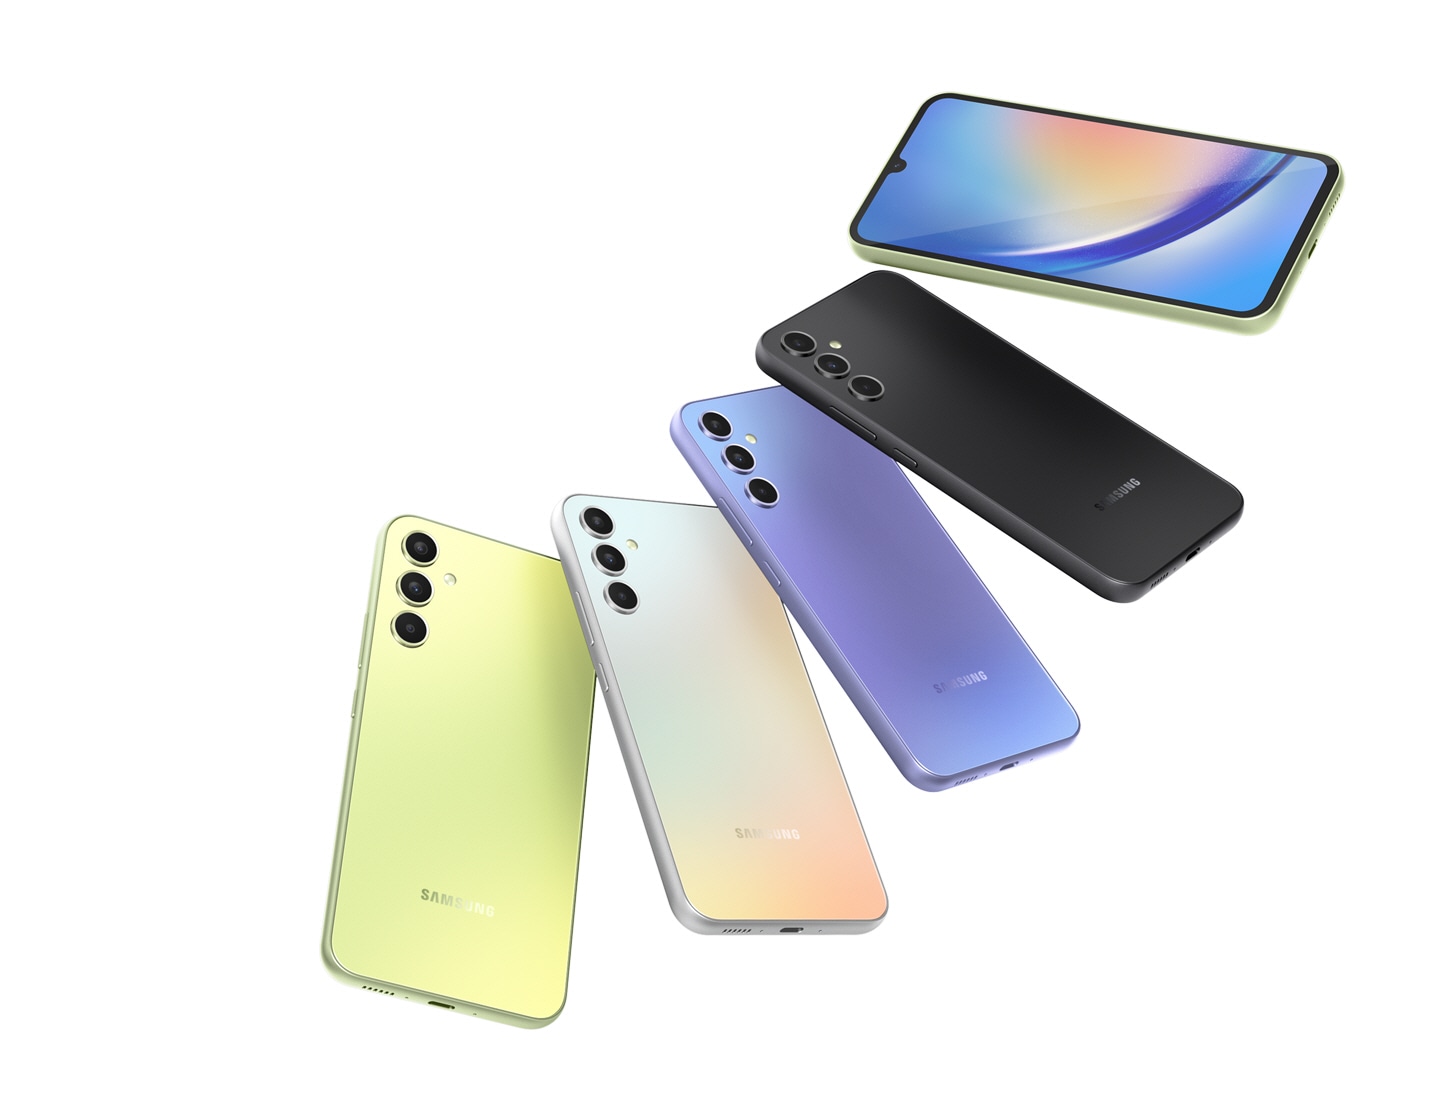 Five Galaxy A34 5G devices are fanned out. Four devices in Awesome Lime, Awesome Silver, Awesome Violet and Awesome Graphite show their backsides while the top most device, in Awesome Lime, shows the screen.